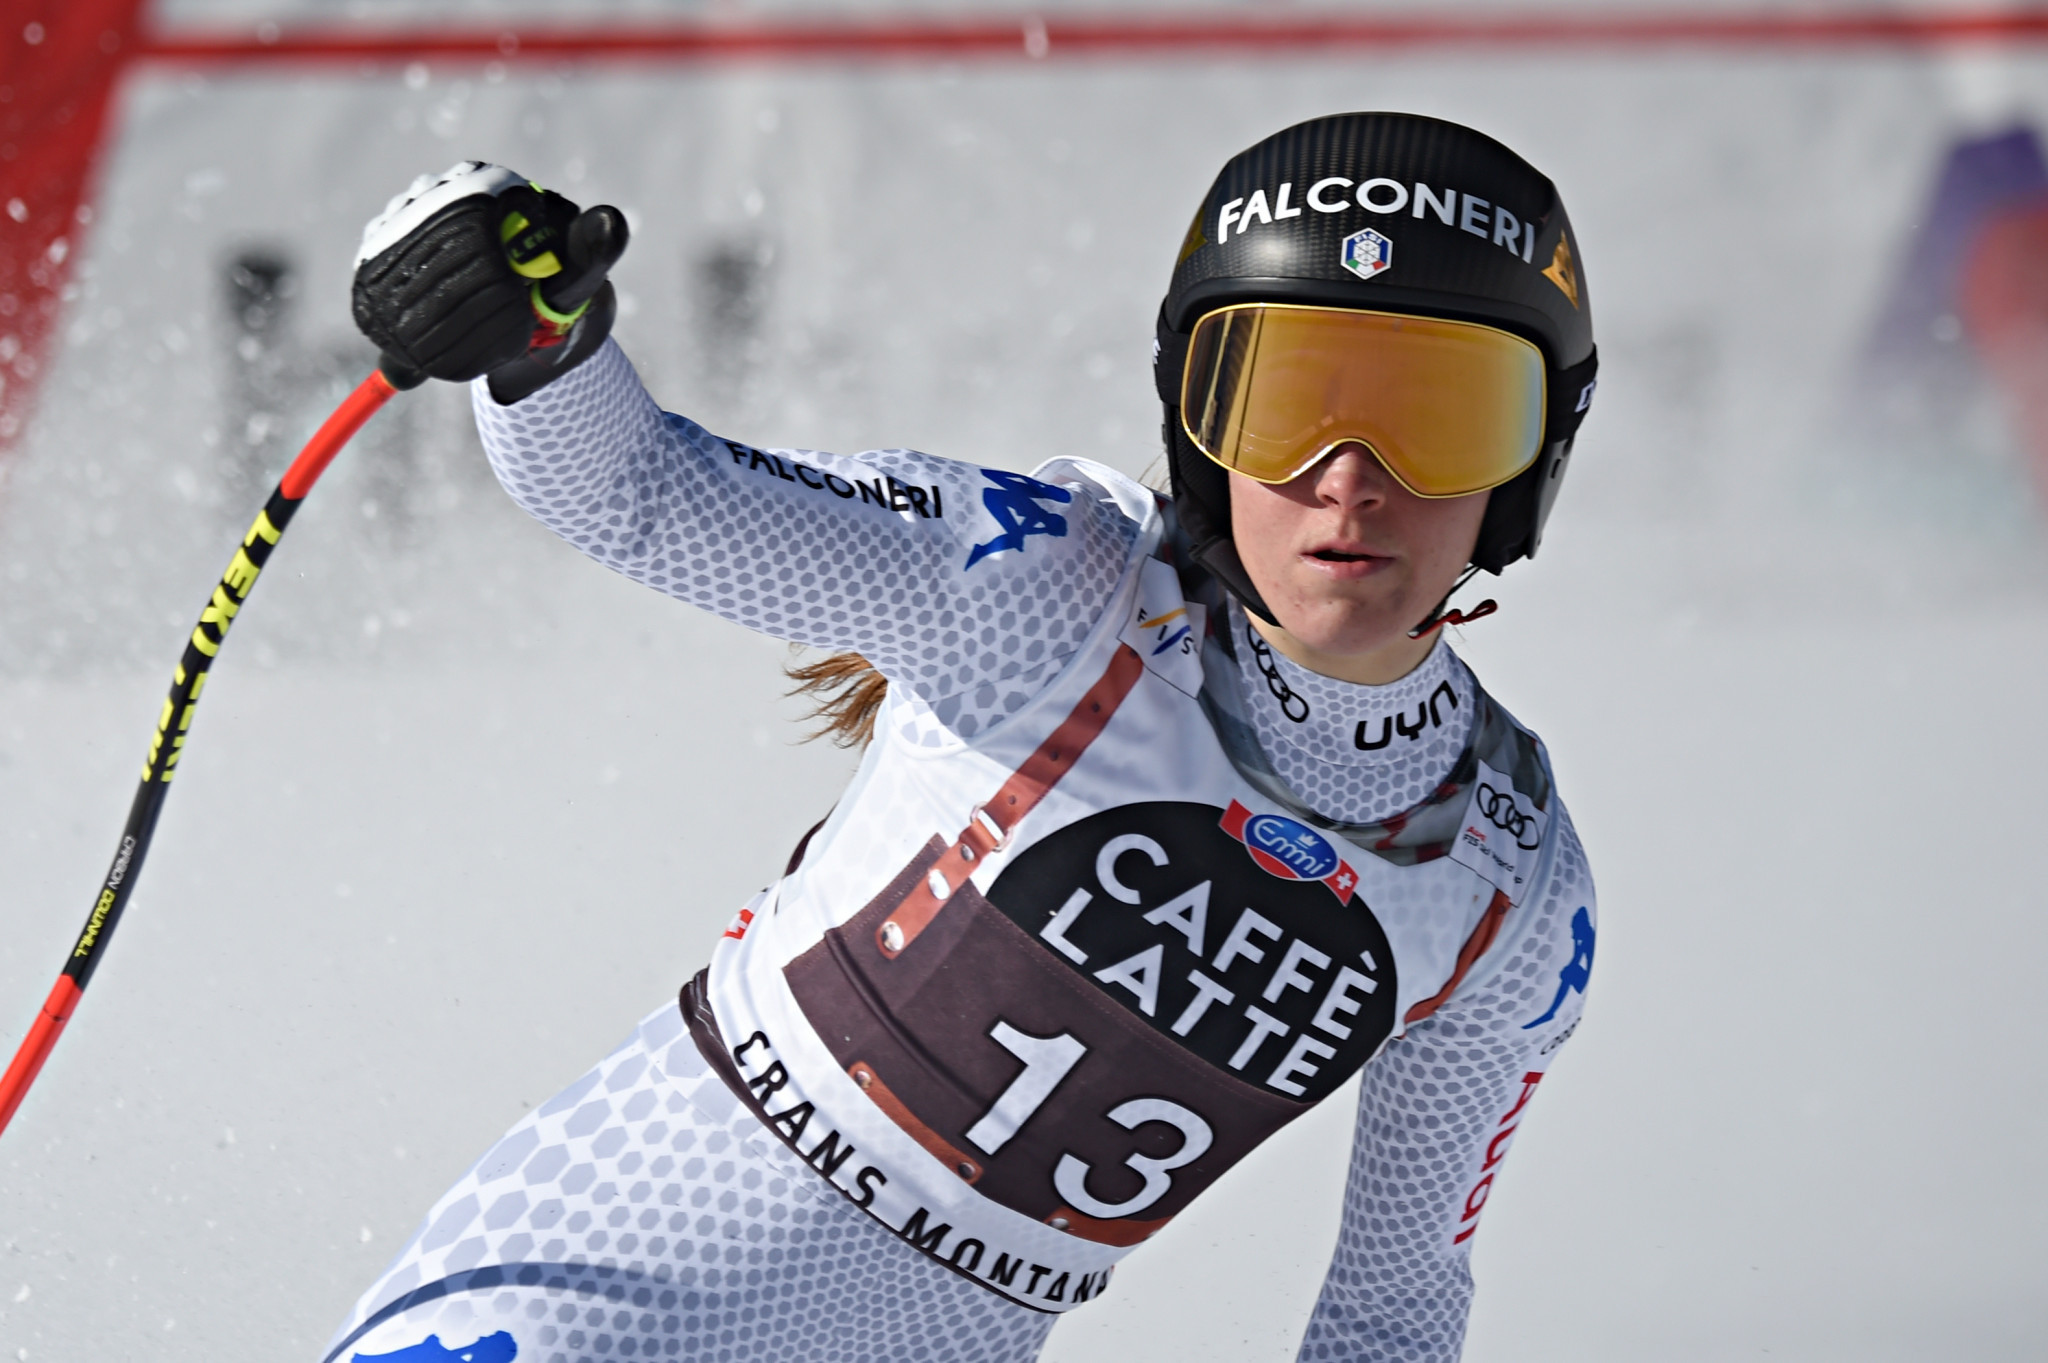 Sofia Goggia triumphed in the downhill event at Crans-Montana ©Getty Images